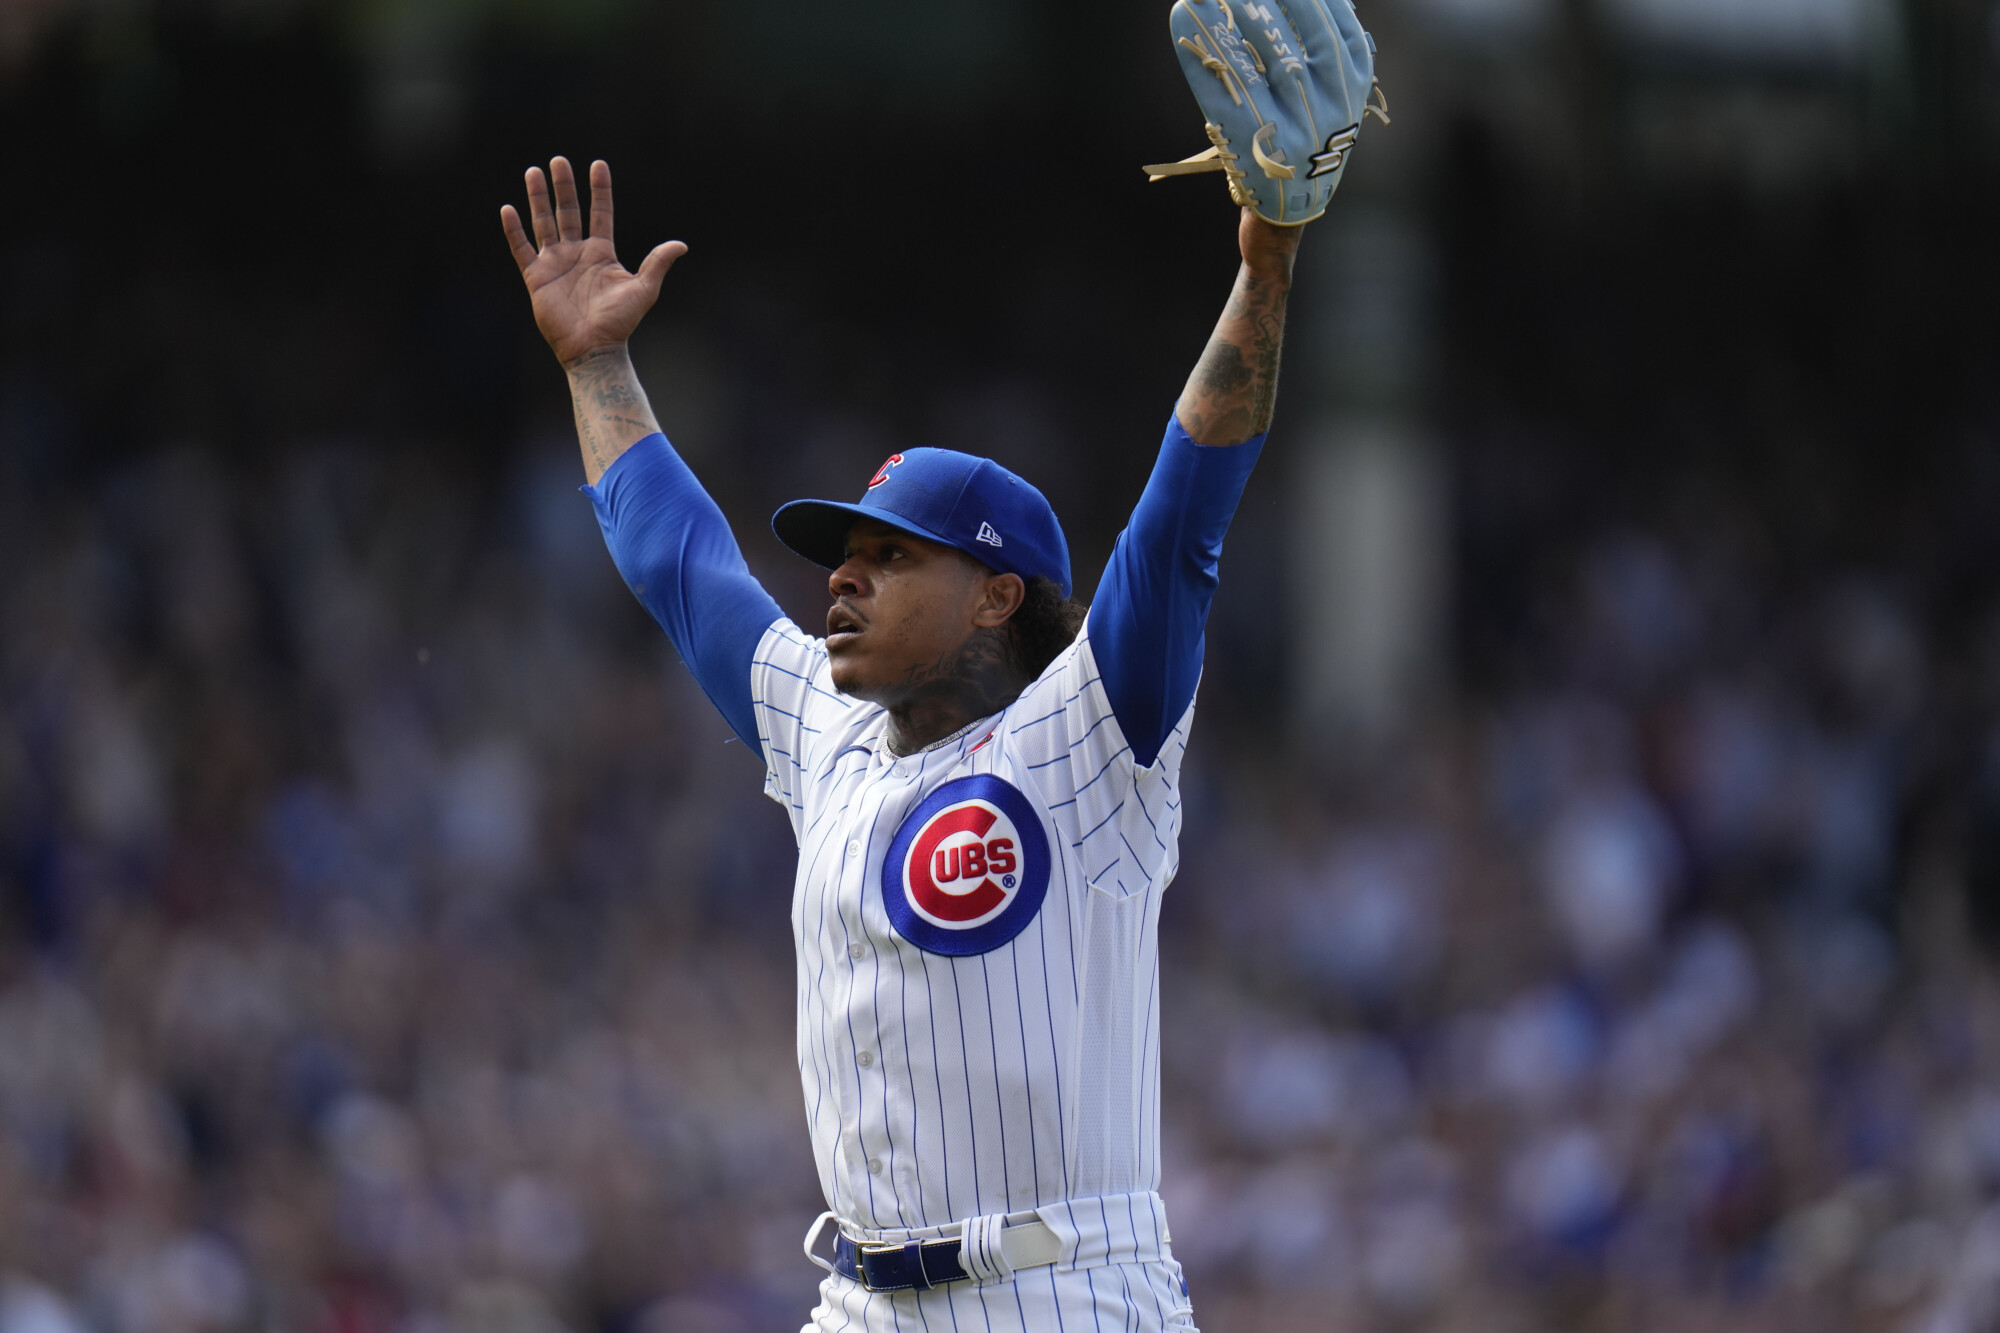 Cubs' assignment for June: Follow Marcus Stroman's lead - Chicago Sun-Times